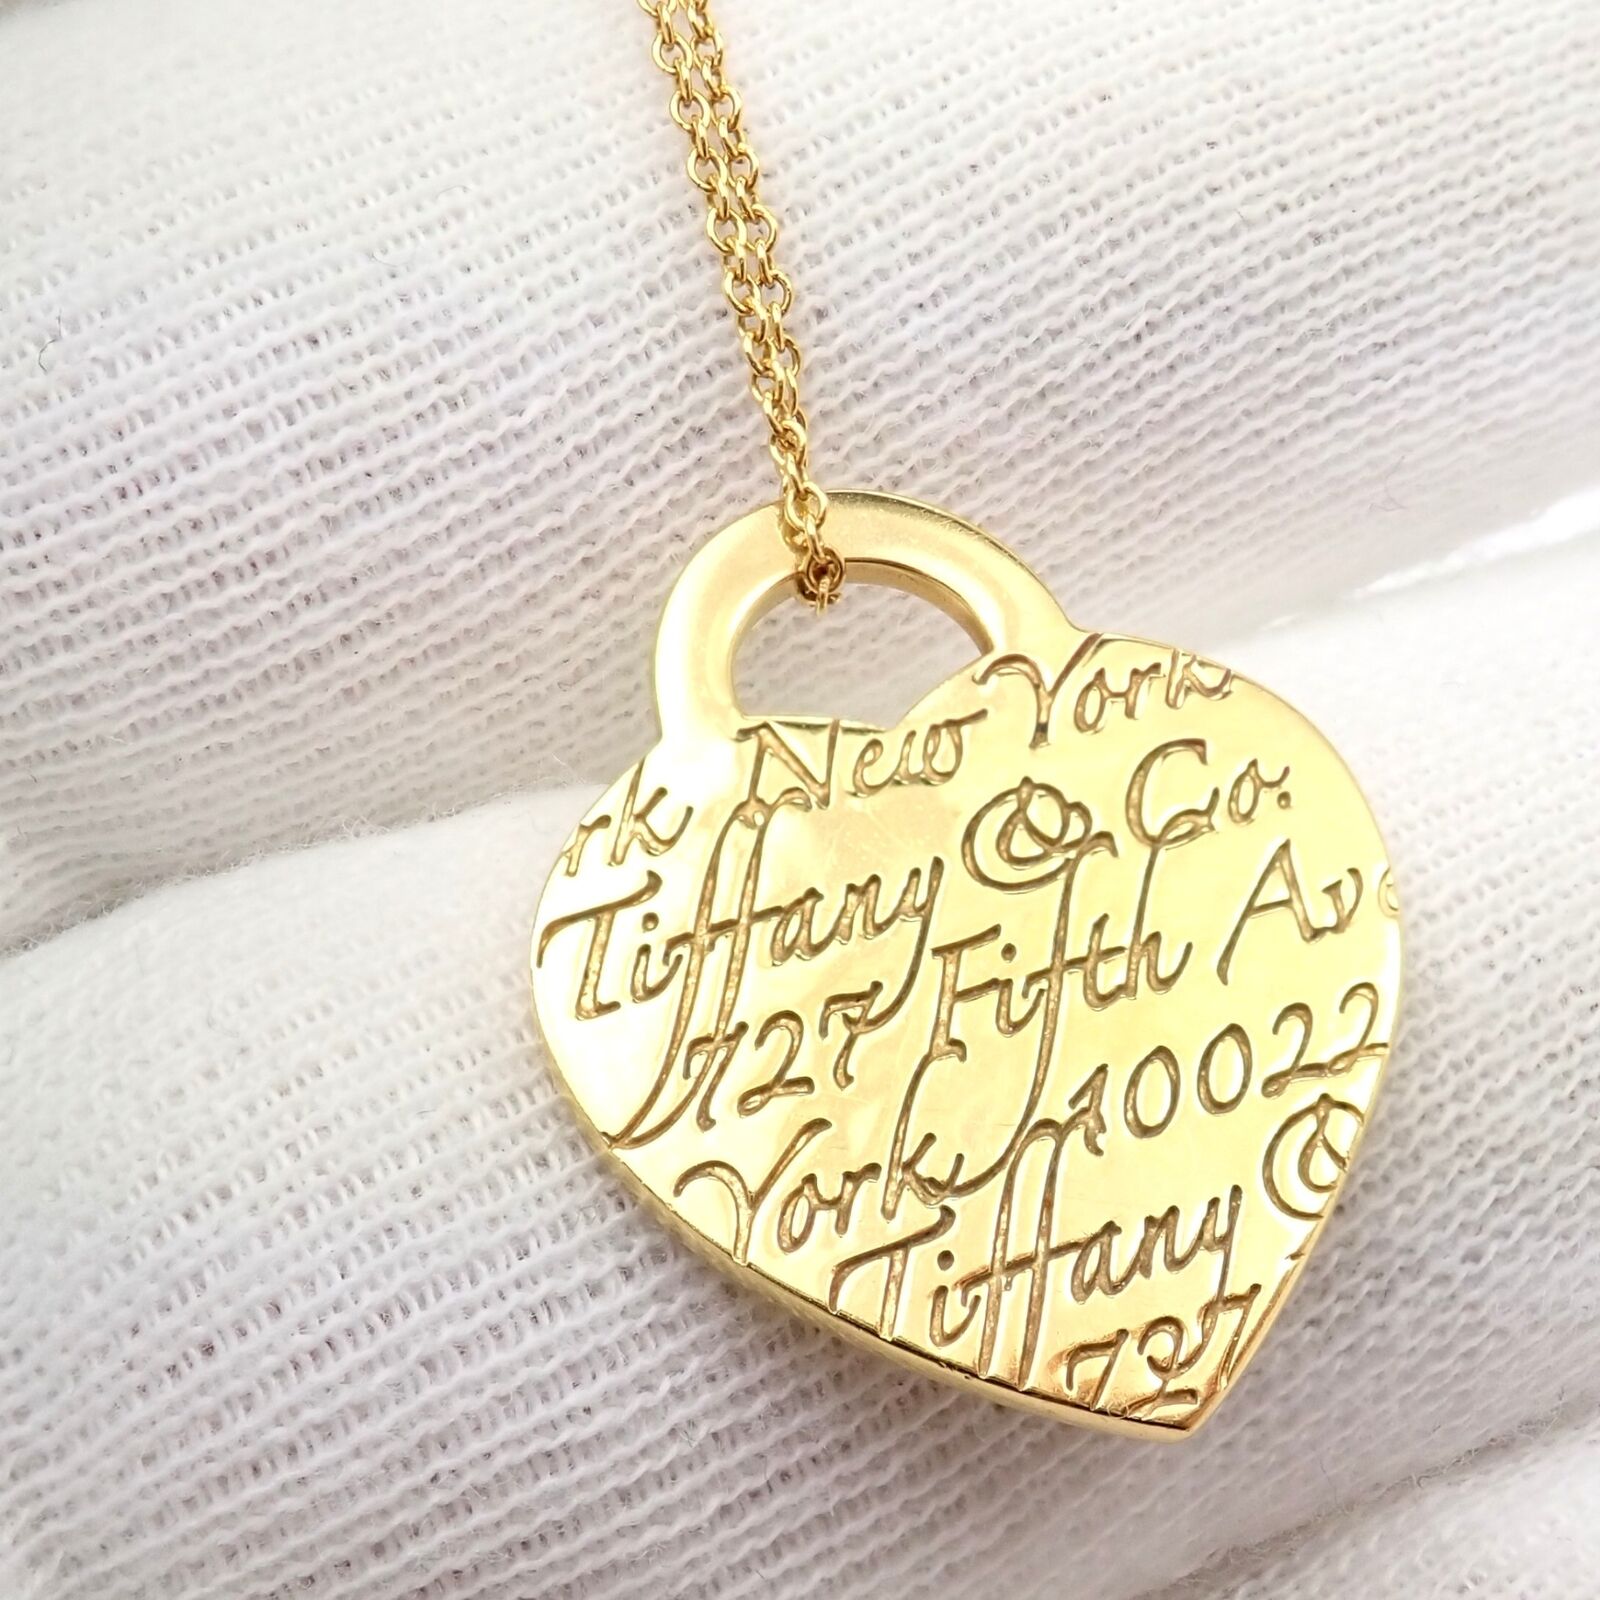 Tiffany & Co. Jewelry & Watches:Fine Jewelry:Necklaces & Pendants Tiffany & Co 18k Yellow Gold Notes Heart New York 5th Ave Pendant Necklace